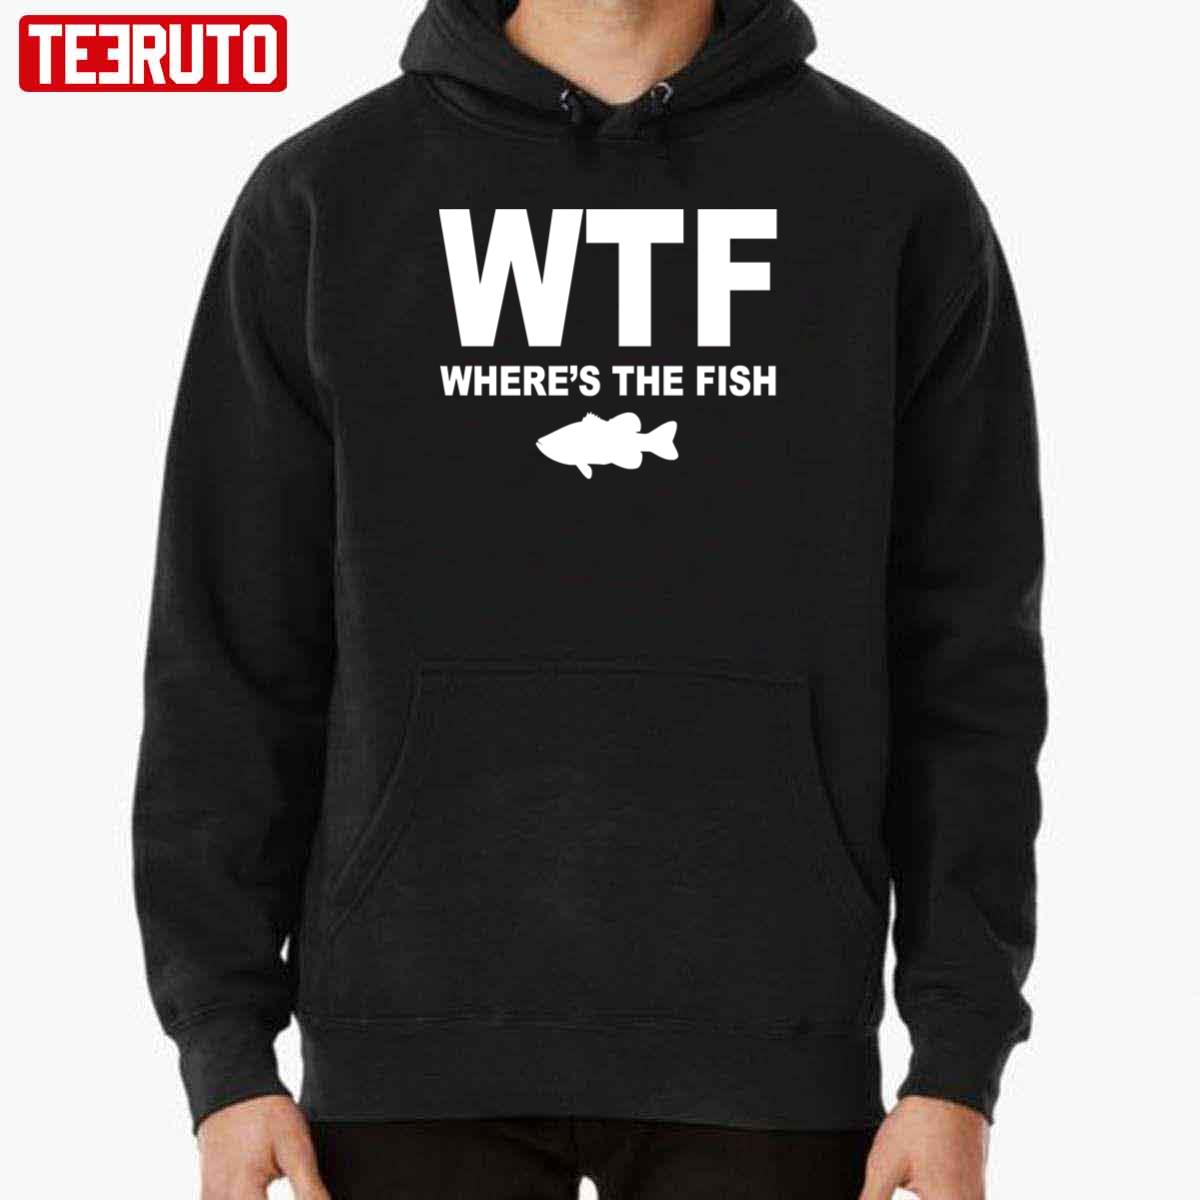 Wtf Where’s The Fish Unisex Hoodie